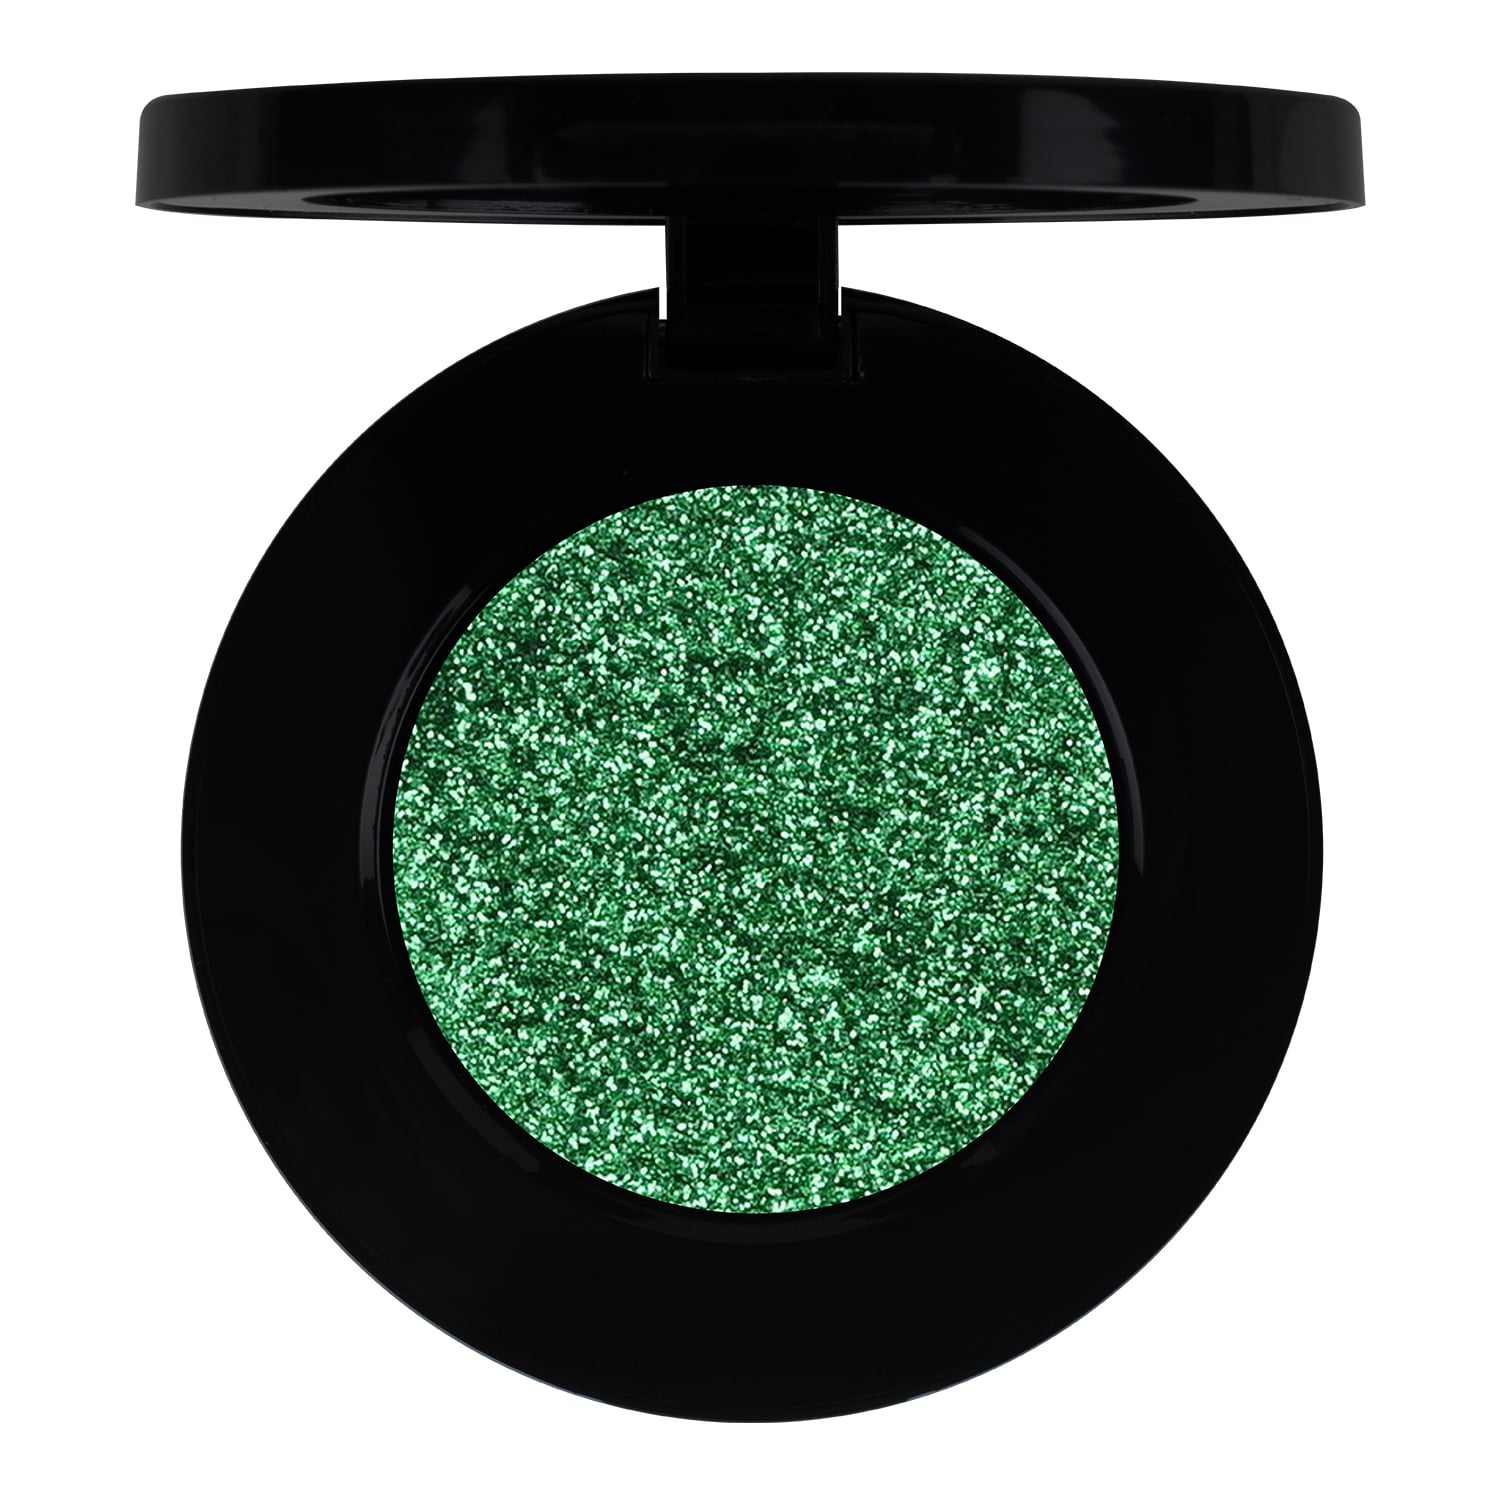 PAC Pressed Glitter Eyeshadow - 25 (Lime Zest) PAC